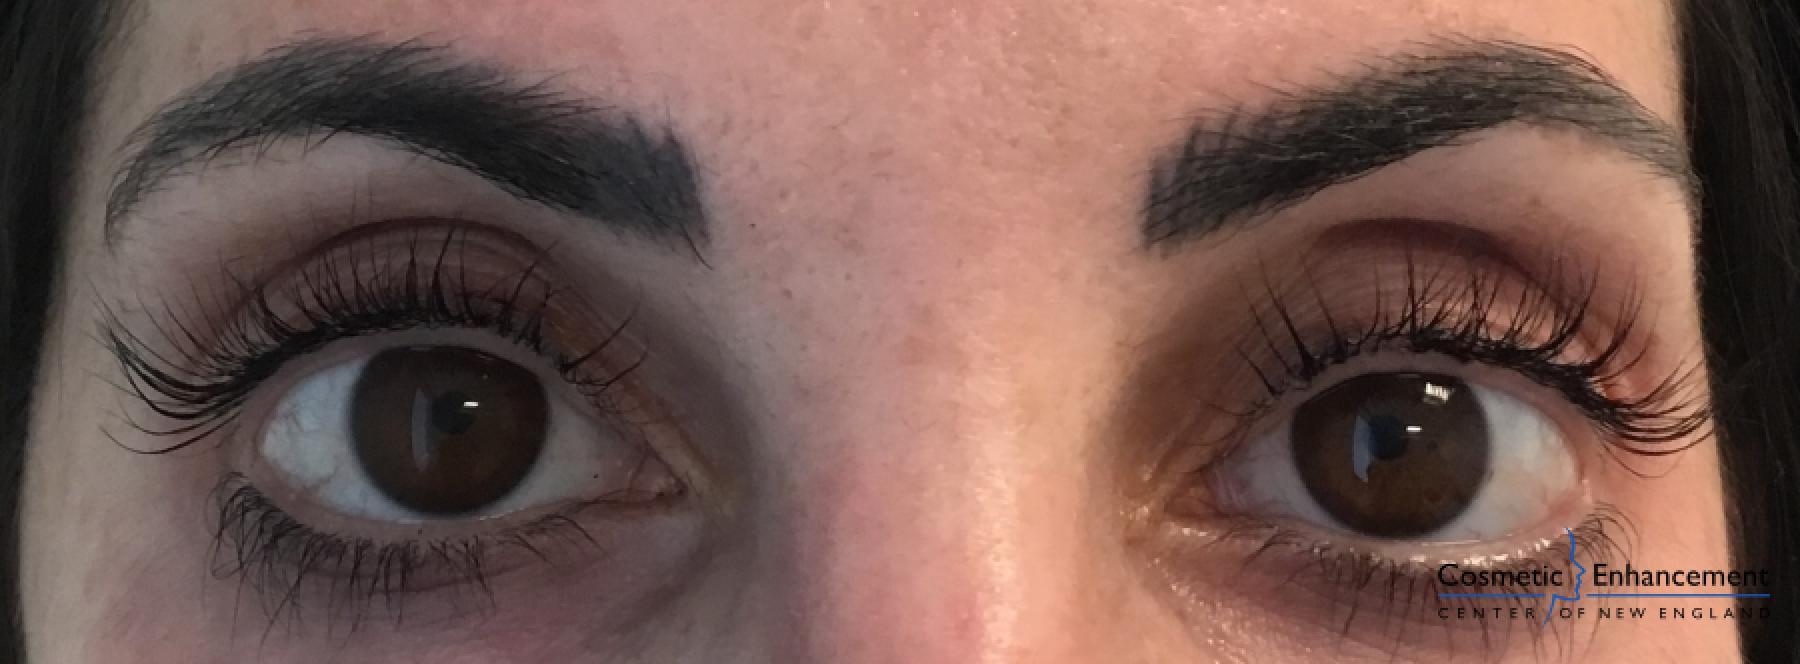 Lash Lift And Tint: Patient 3 - After  